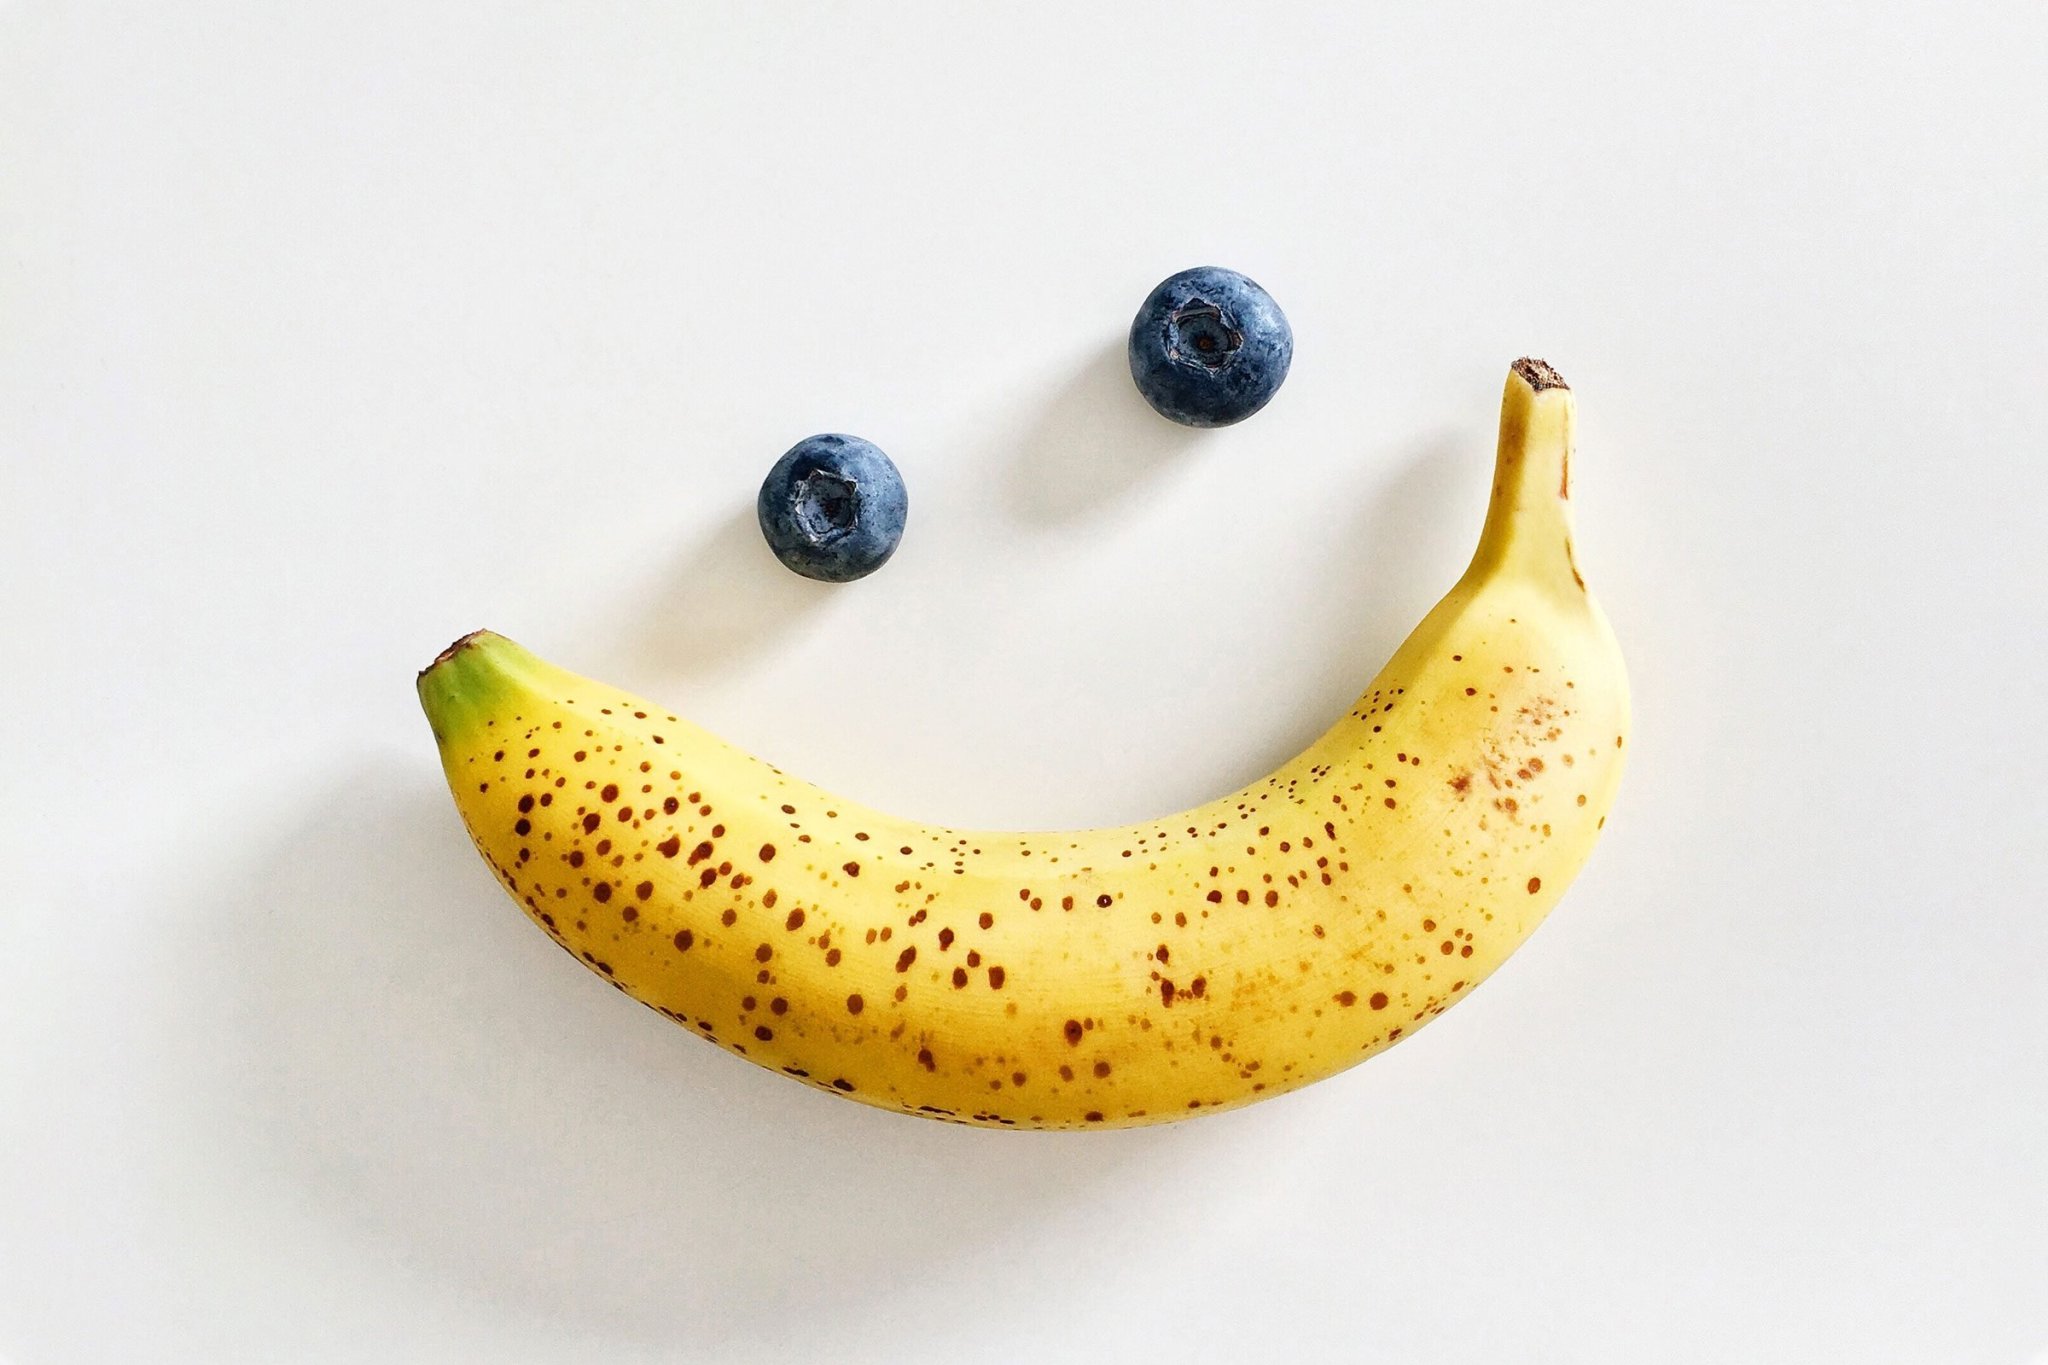 The Banana Health Benefit You for Sure Weren’t Aware Of, Dietitians Reveal